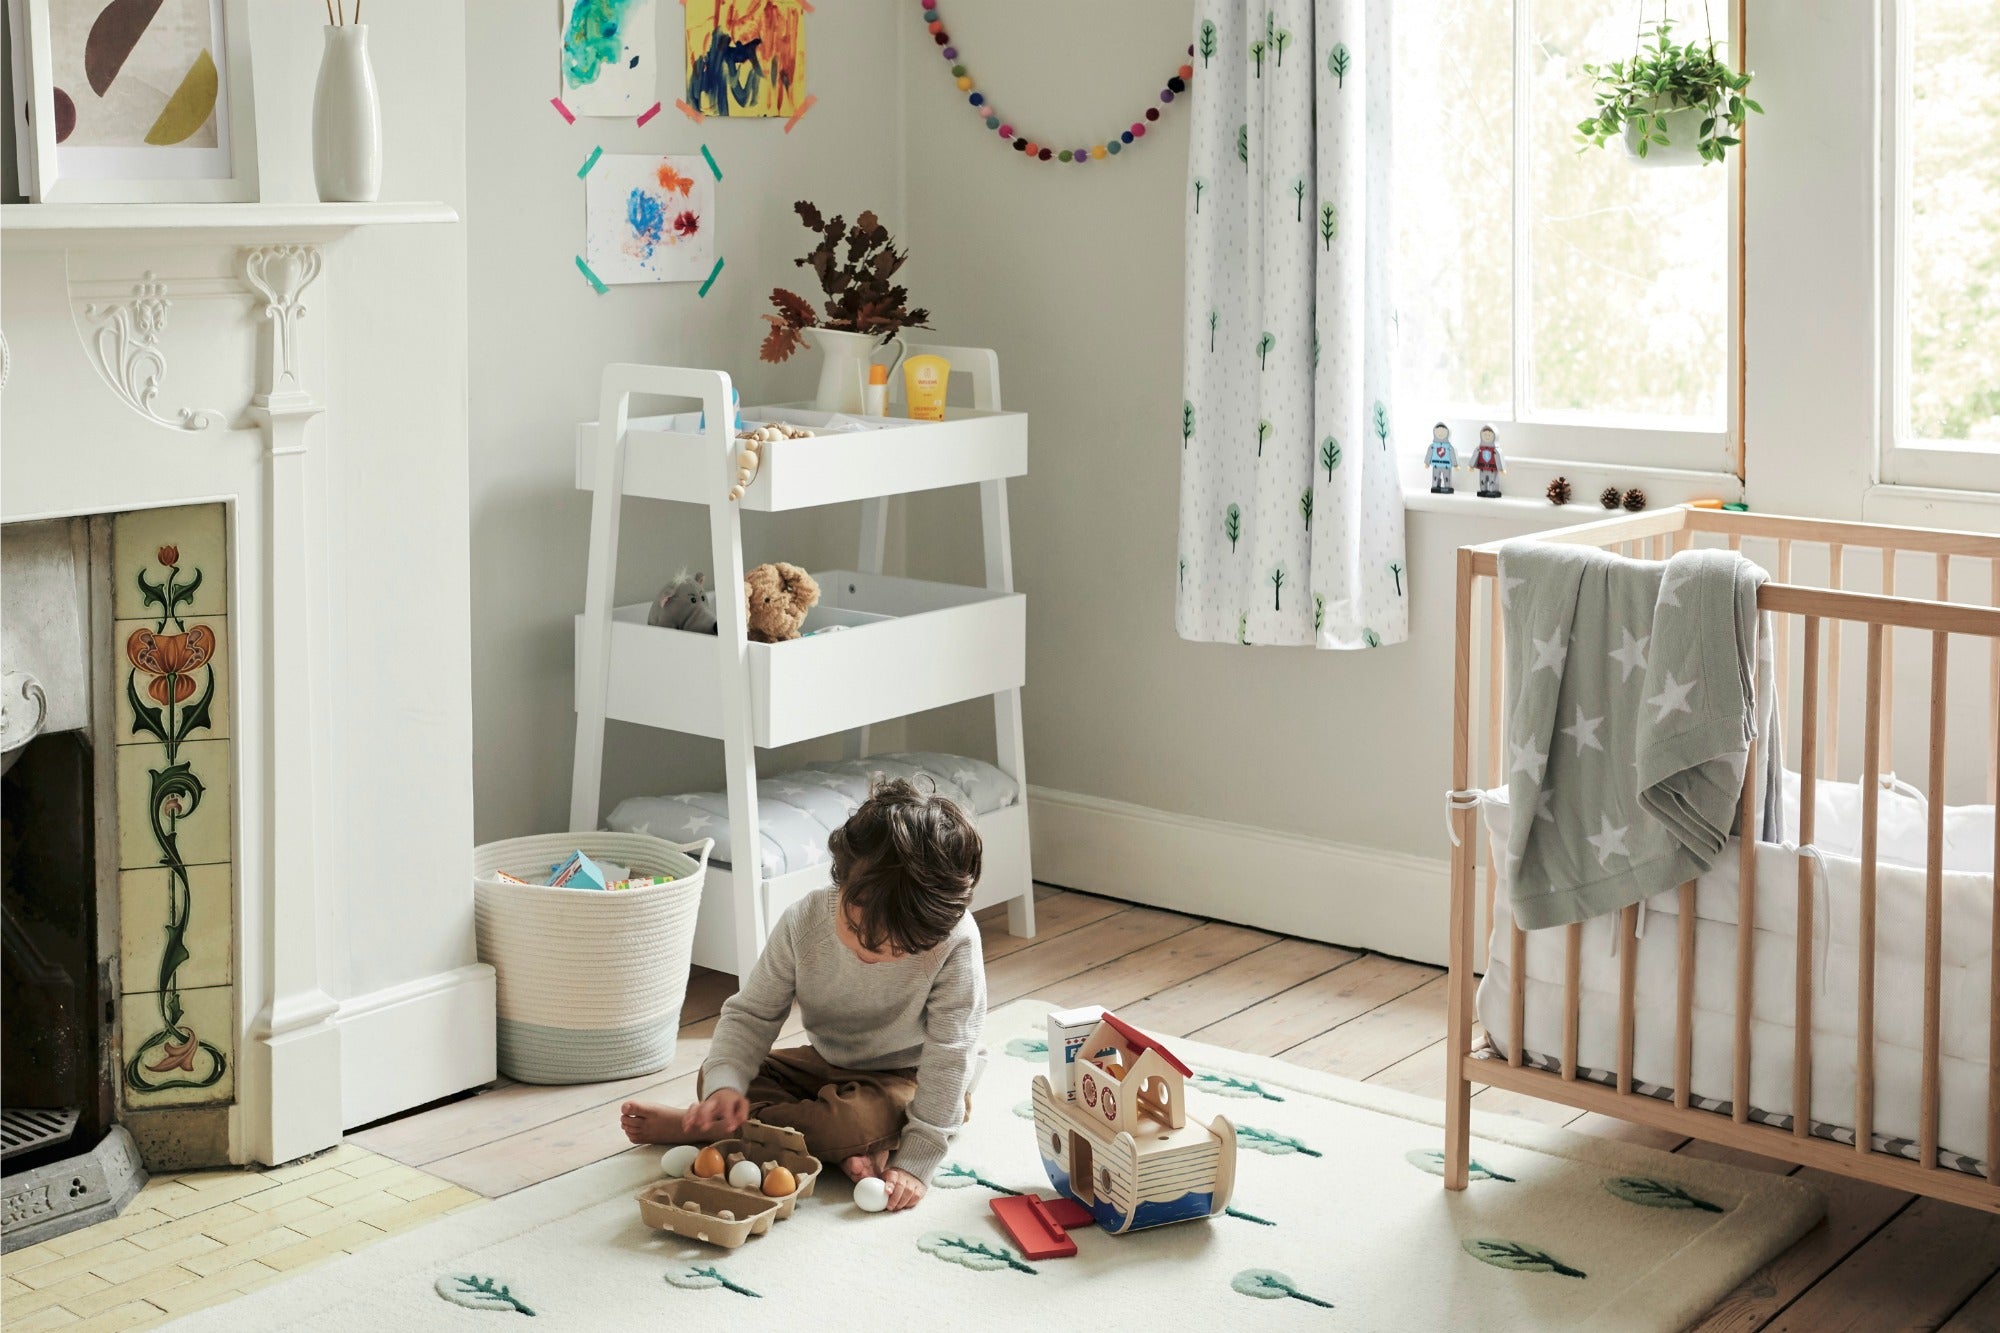 We talk interiors for children with Room To Bloom's Ursula Wesselingh